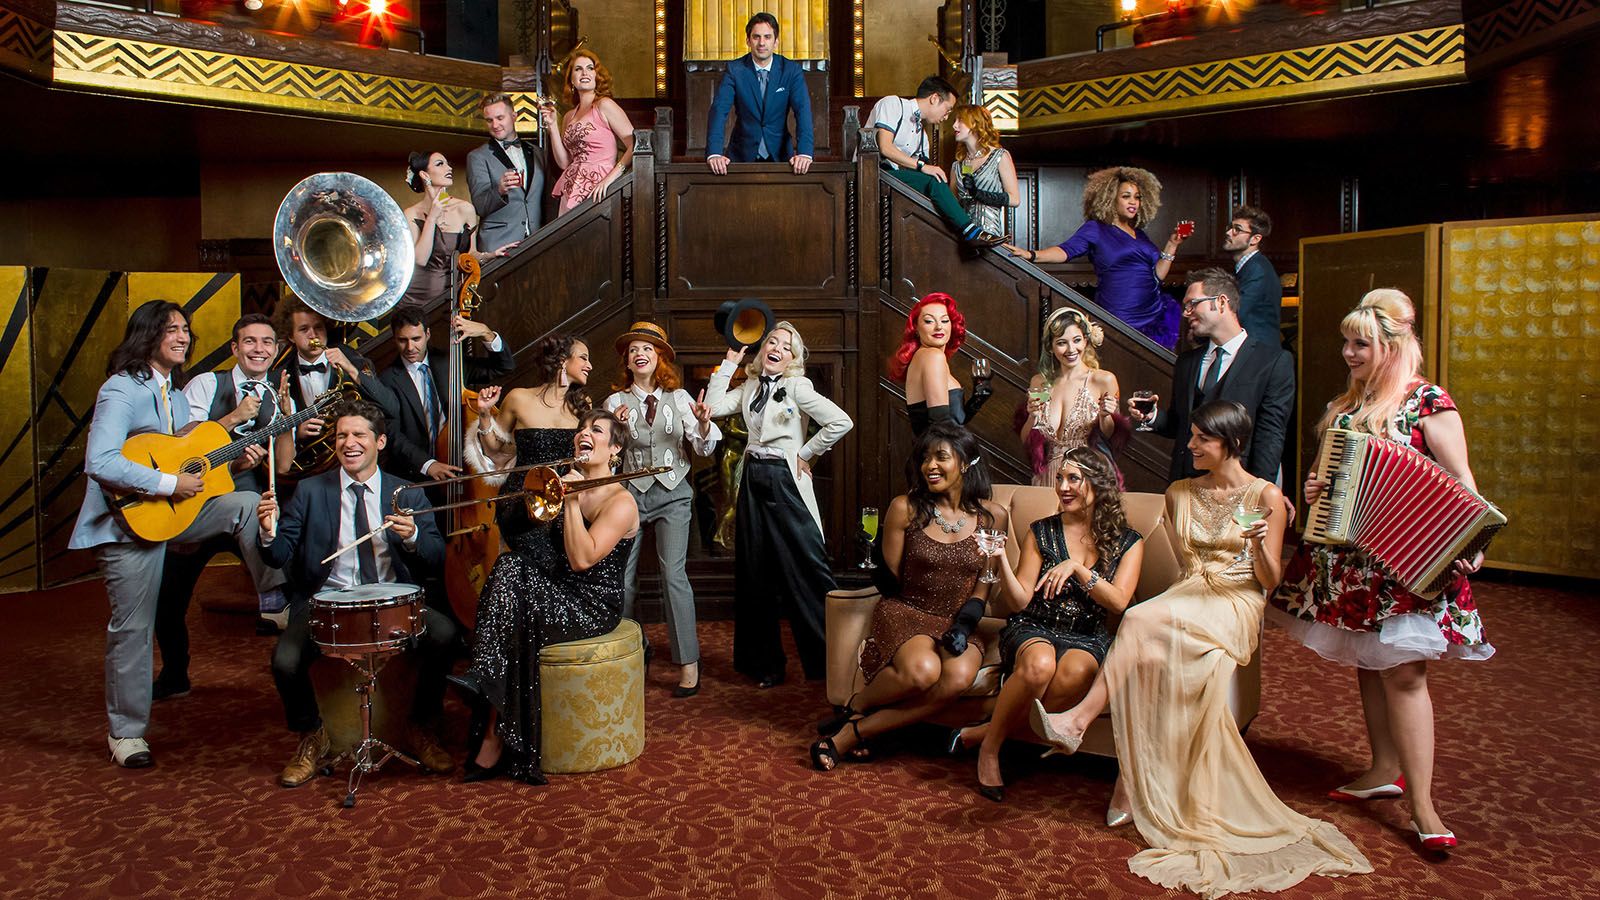 Scott Bradless' Postmodern Jukebox will be at The Clyde Theatre on Oct. 14.